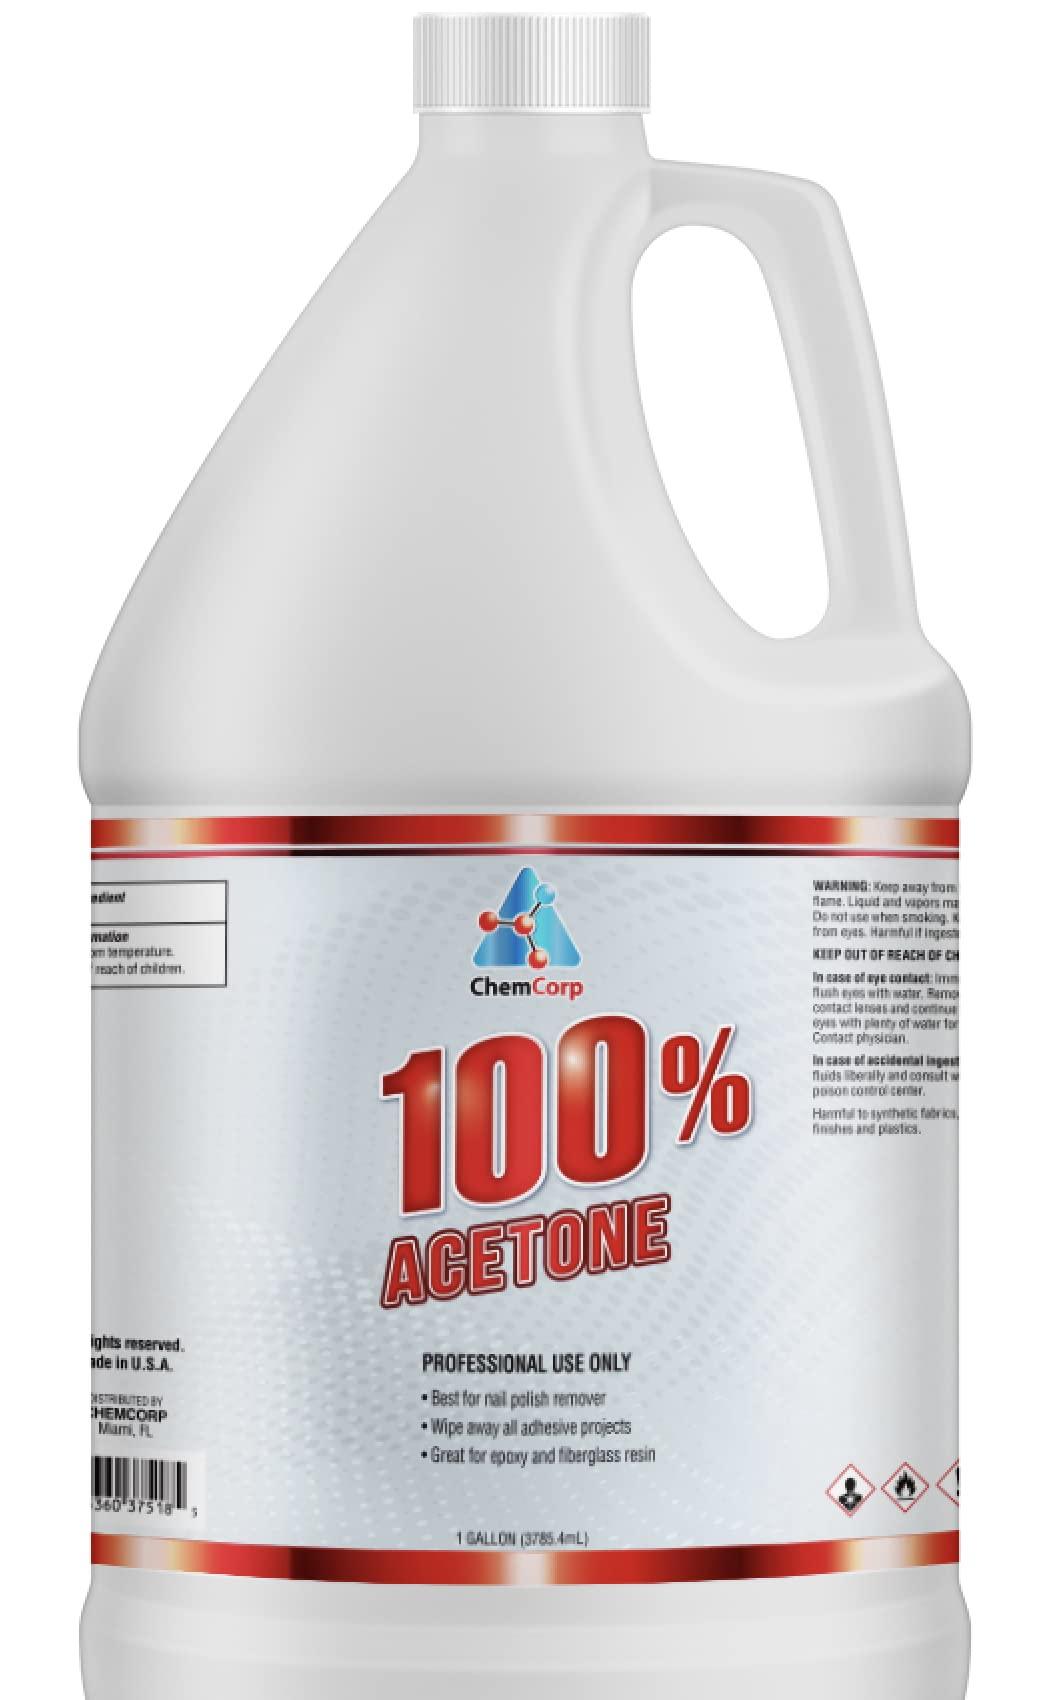 In Store Only] CnC Acetone 100% - 1 Gallon — C8 Nail Supply